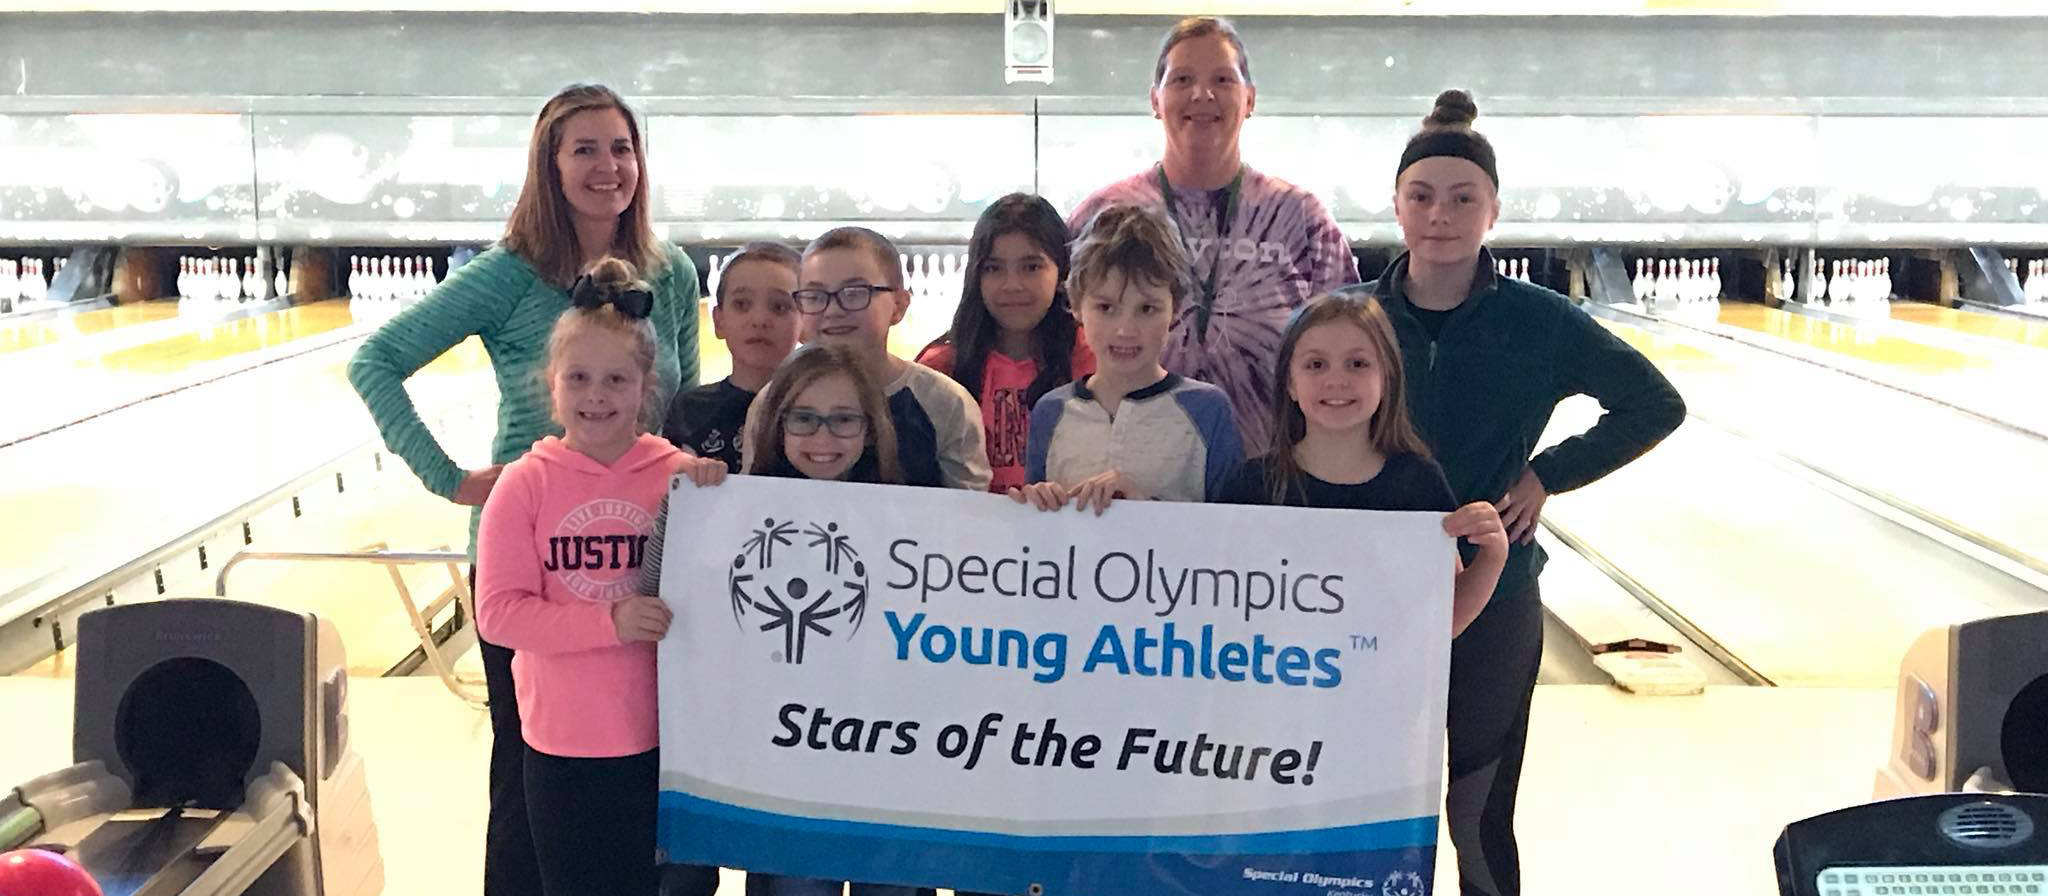 Dayton Elementary School Boasts Kentucky’s First Unified Young Athletes